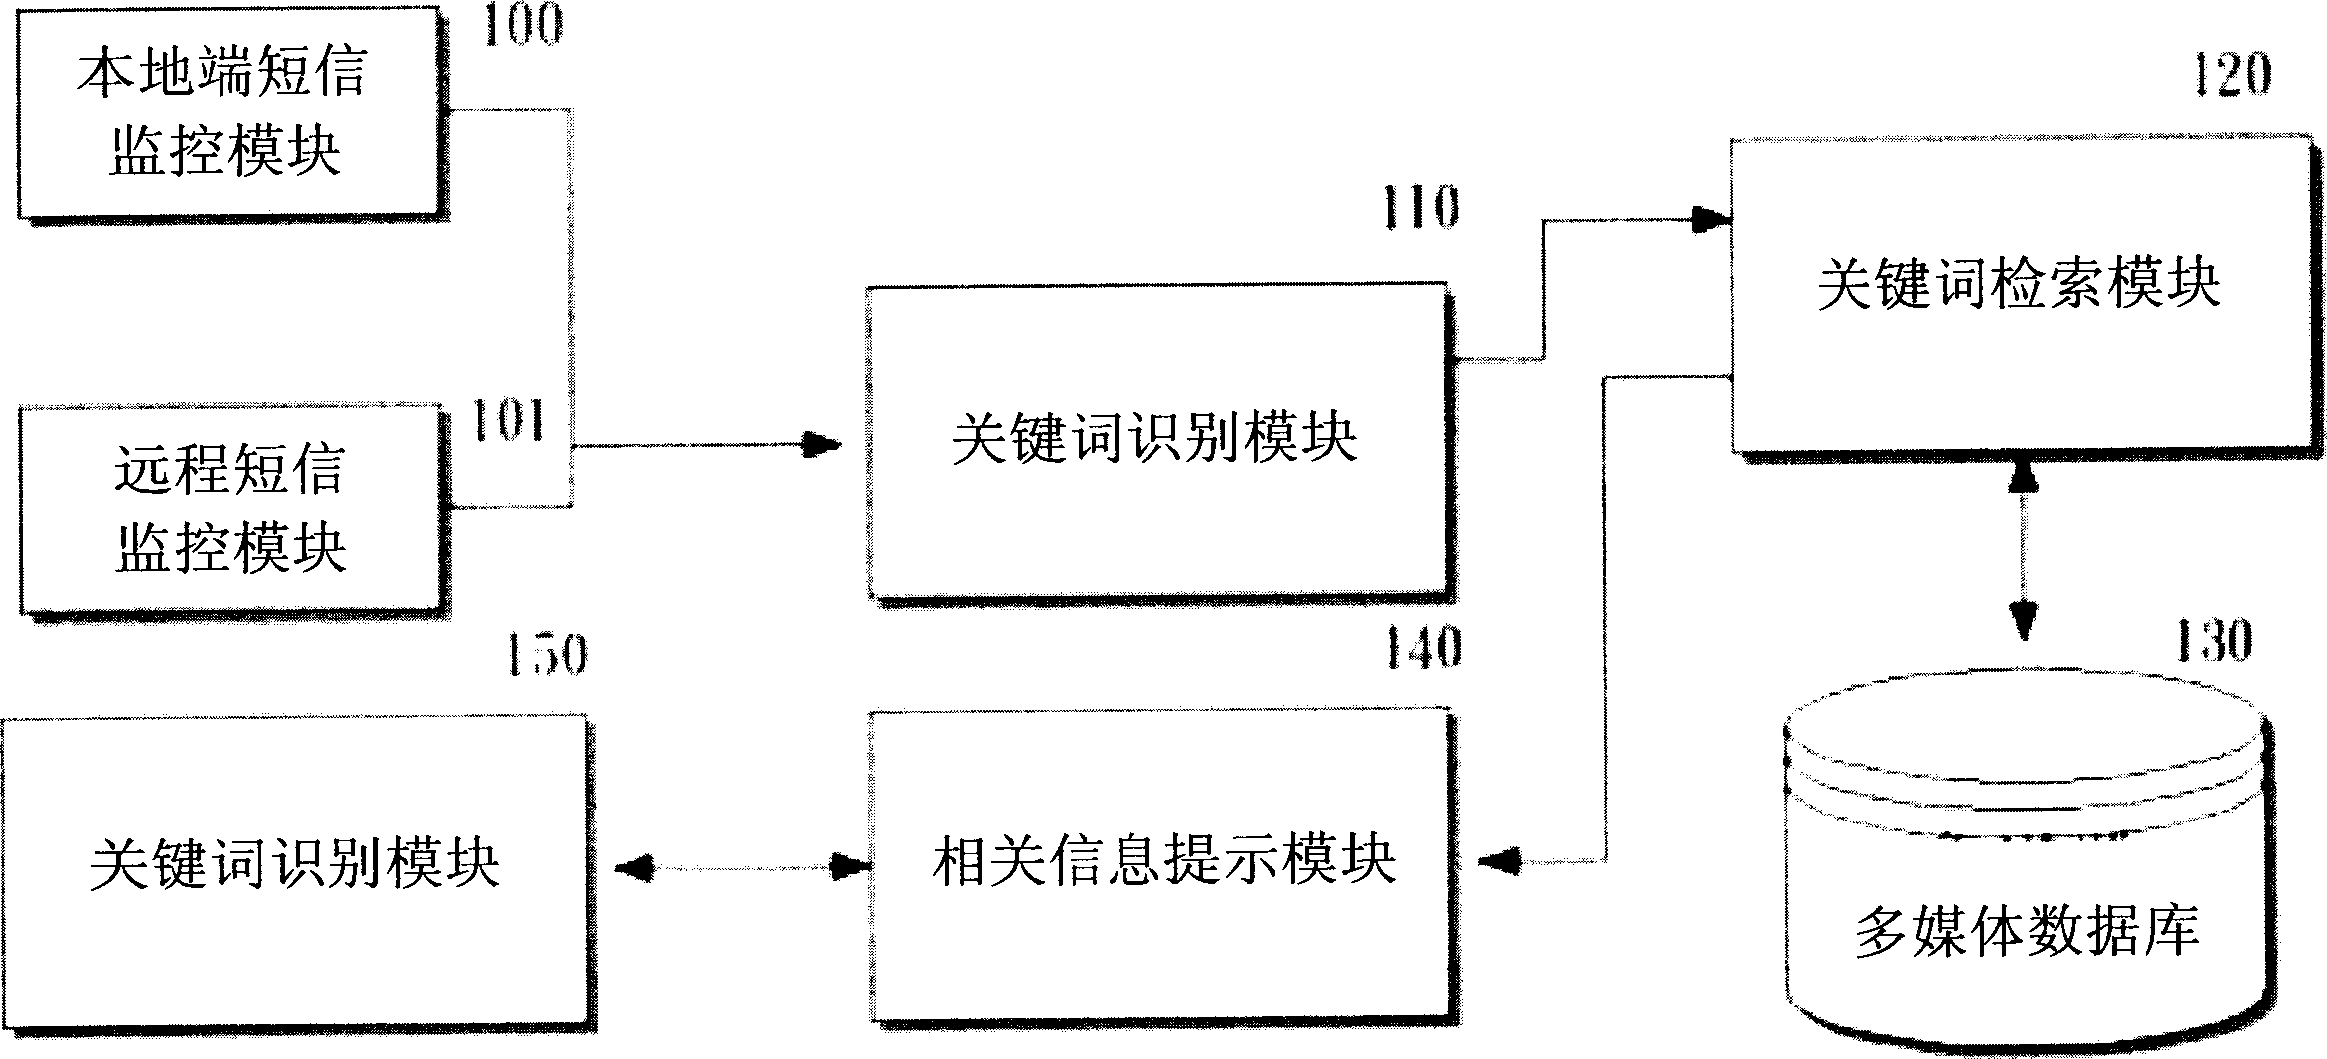 System capable of dynamically displaying correlative information in short message and its method